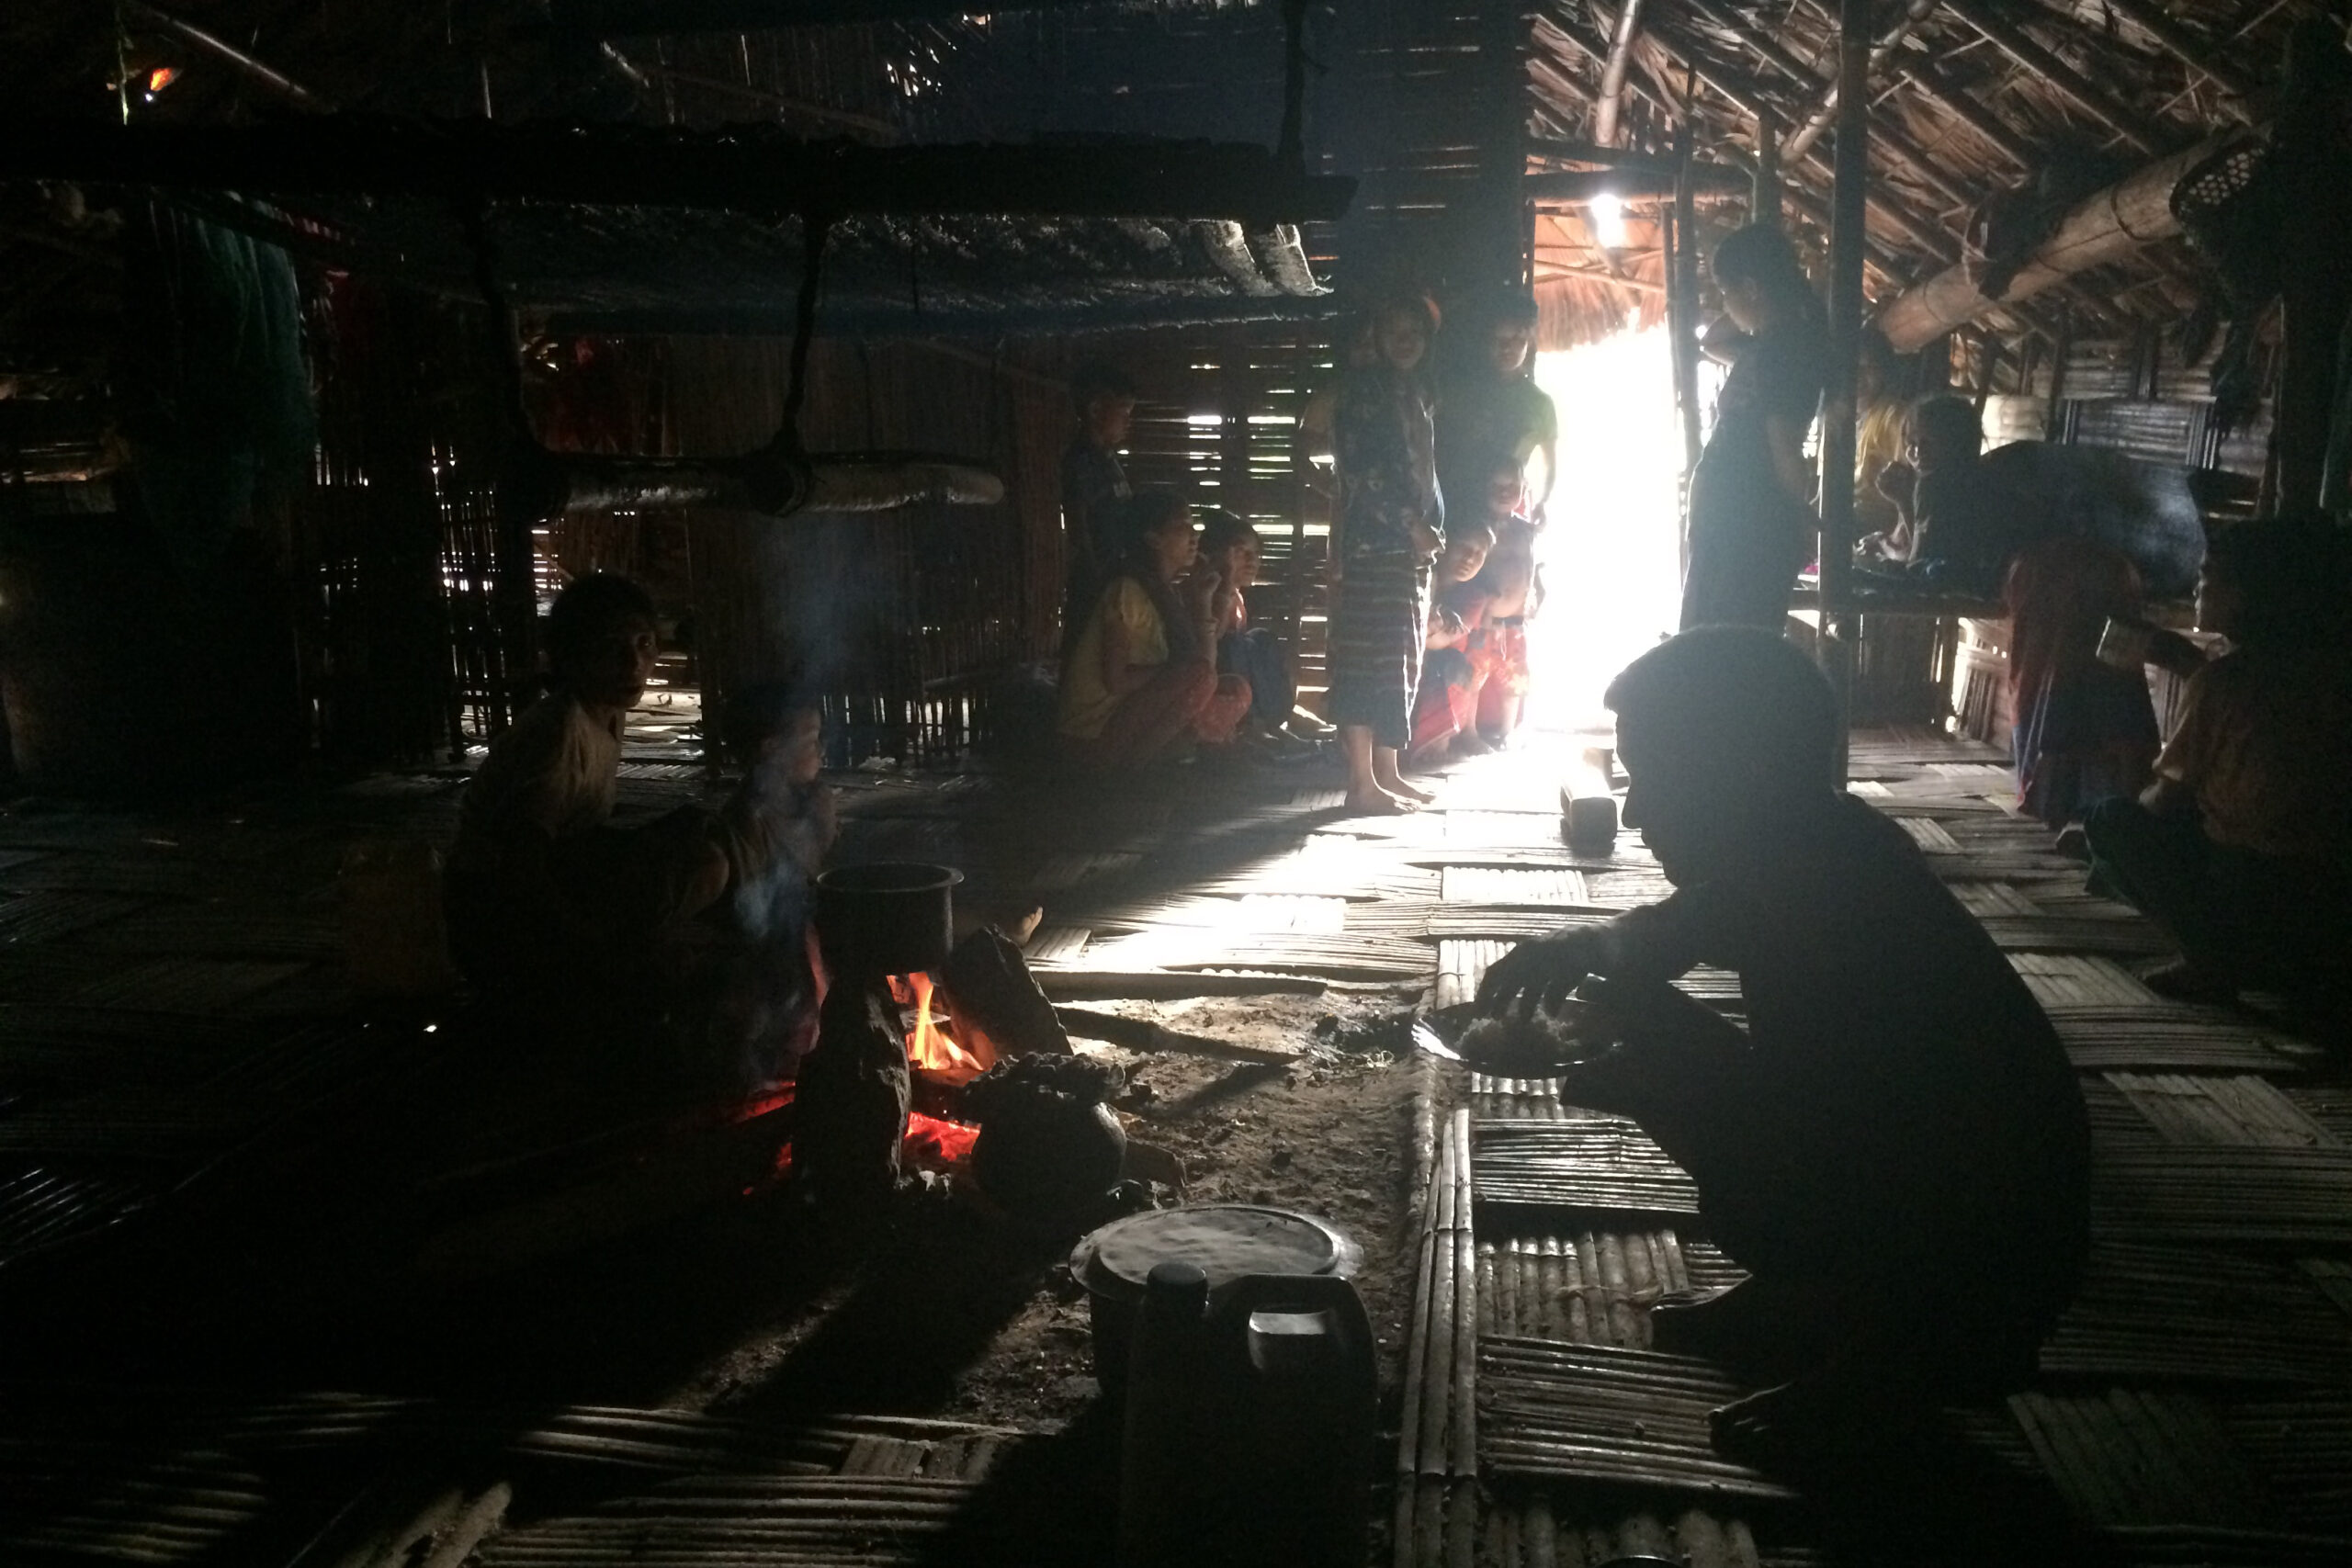 U Par Loon and his family have dinner inside his home. (Photo: Nan Tin Htwe)